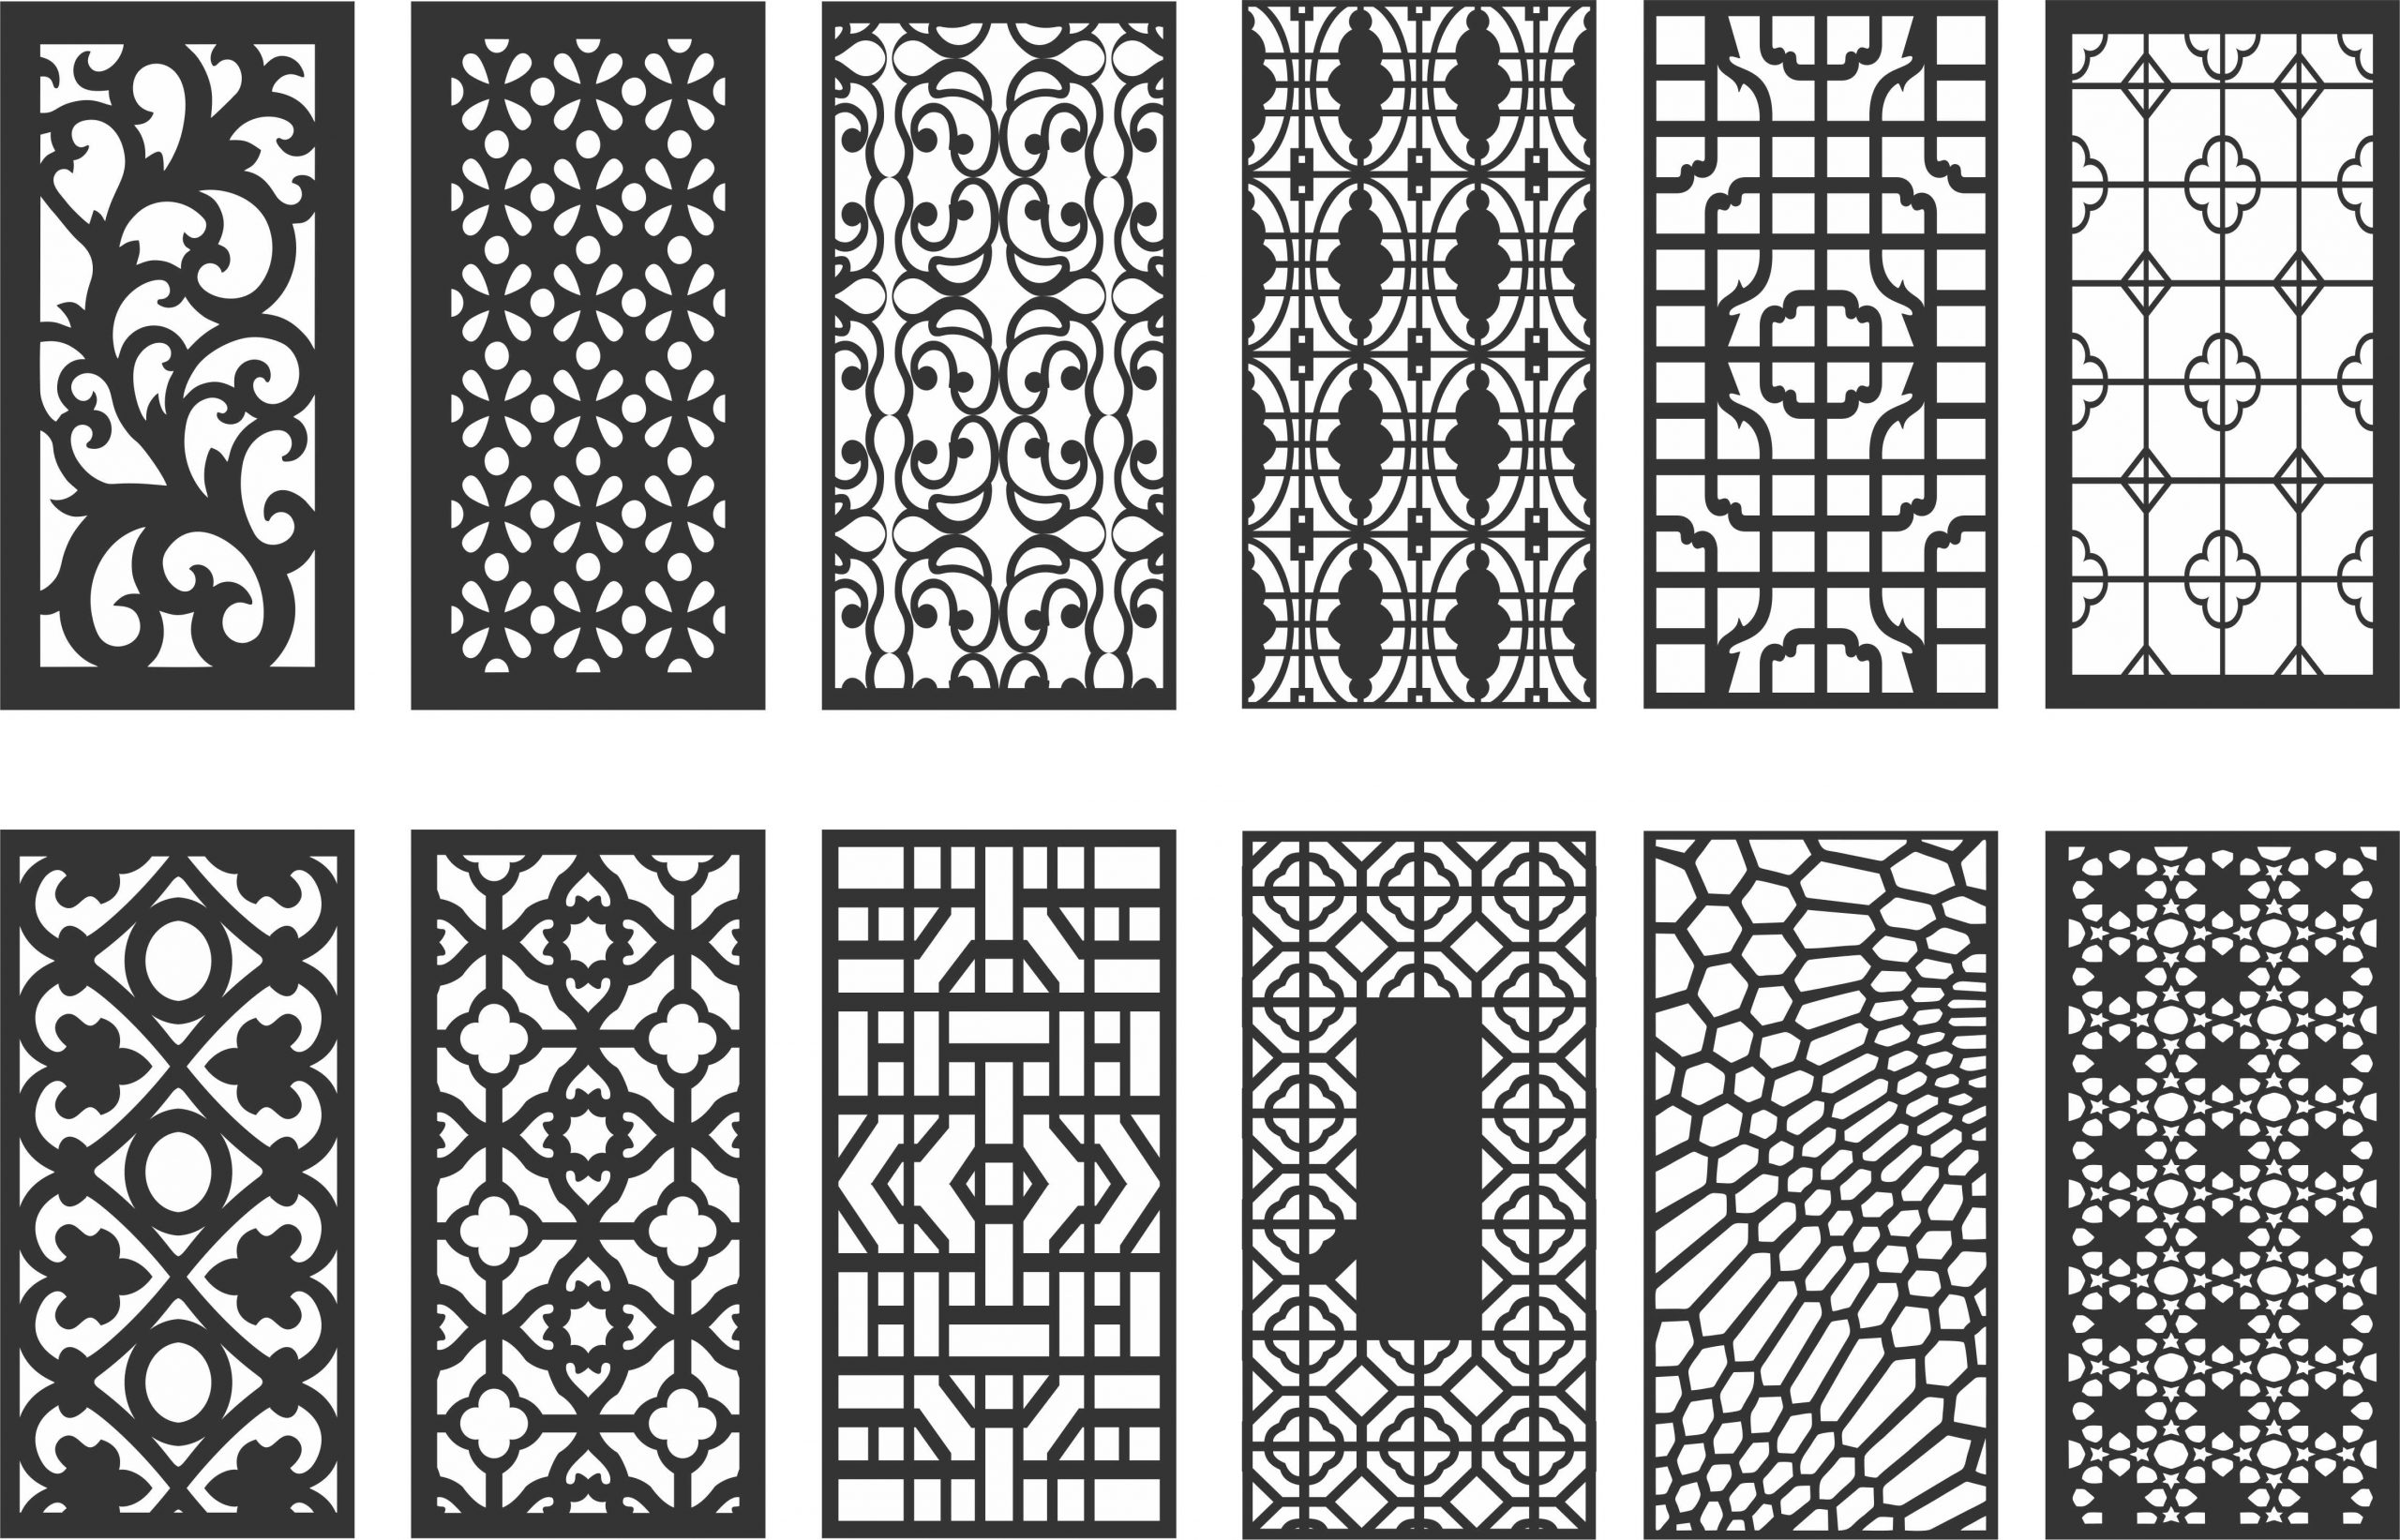 Dxf File Plasma Laser Cut Cnc Router Plans Free Vector | Images and